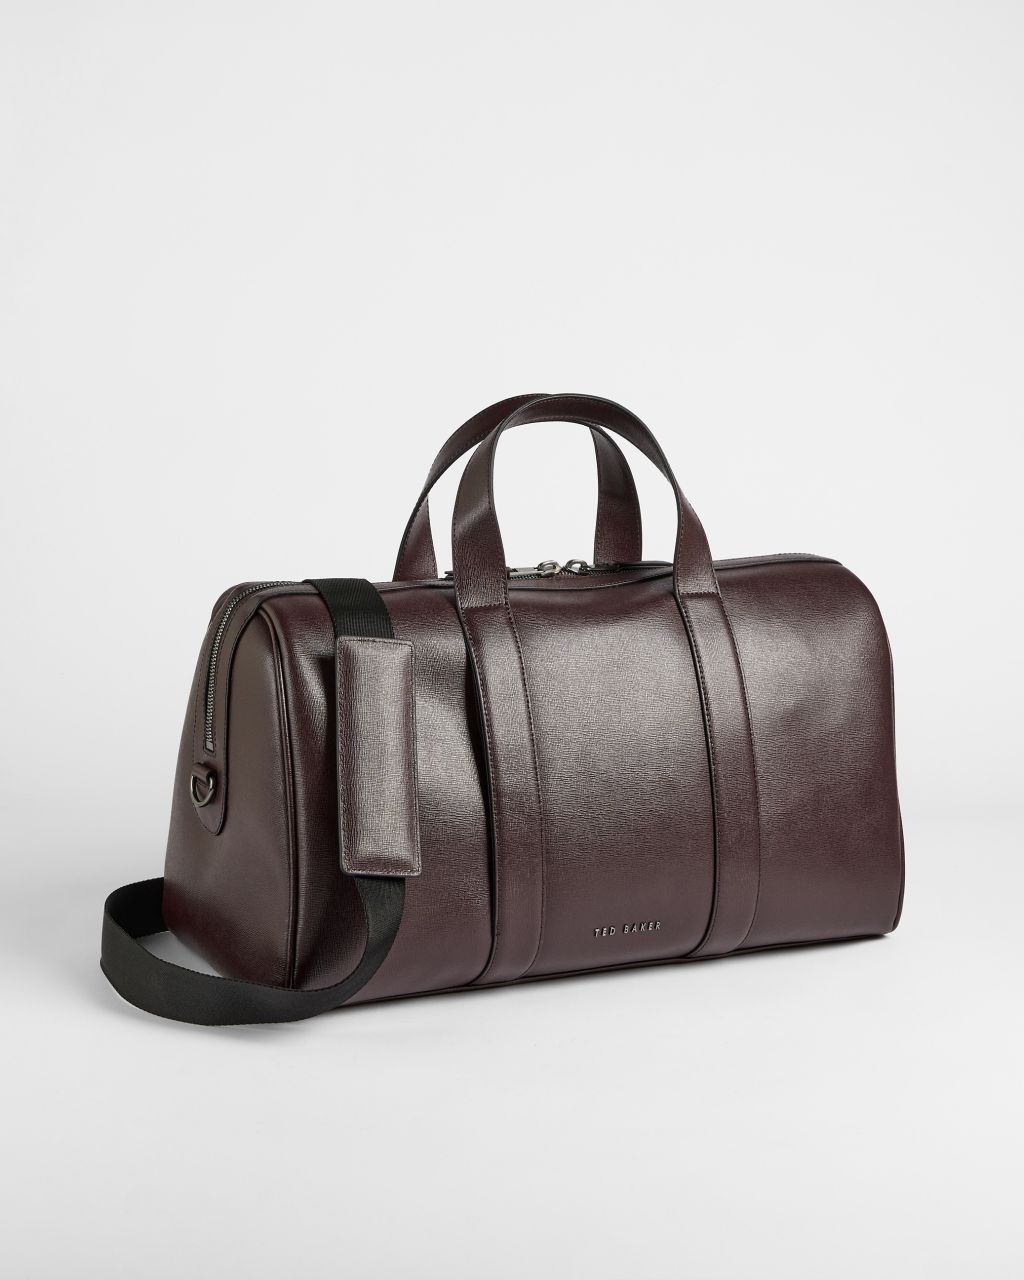 Ted Baker Men's Saffiano Leather Holdall Bag In Brown, Fidick